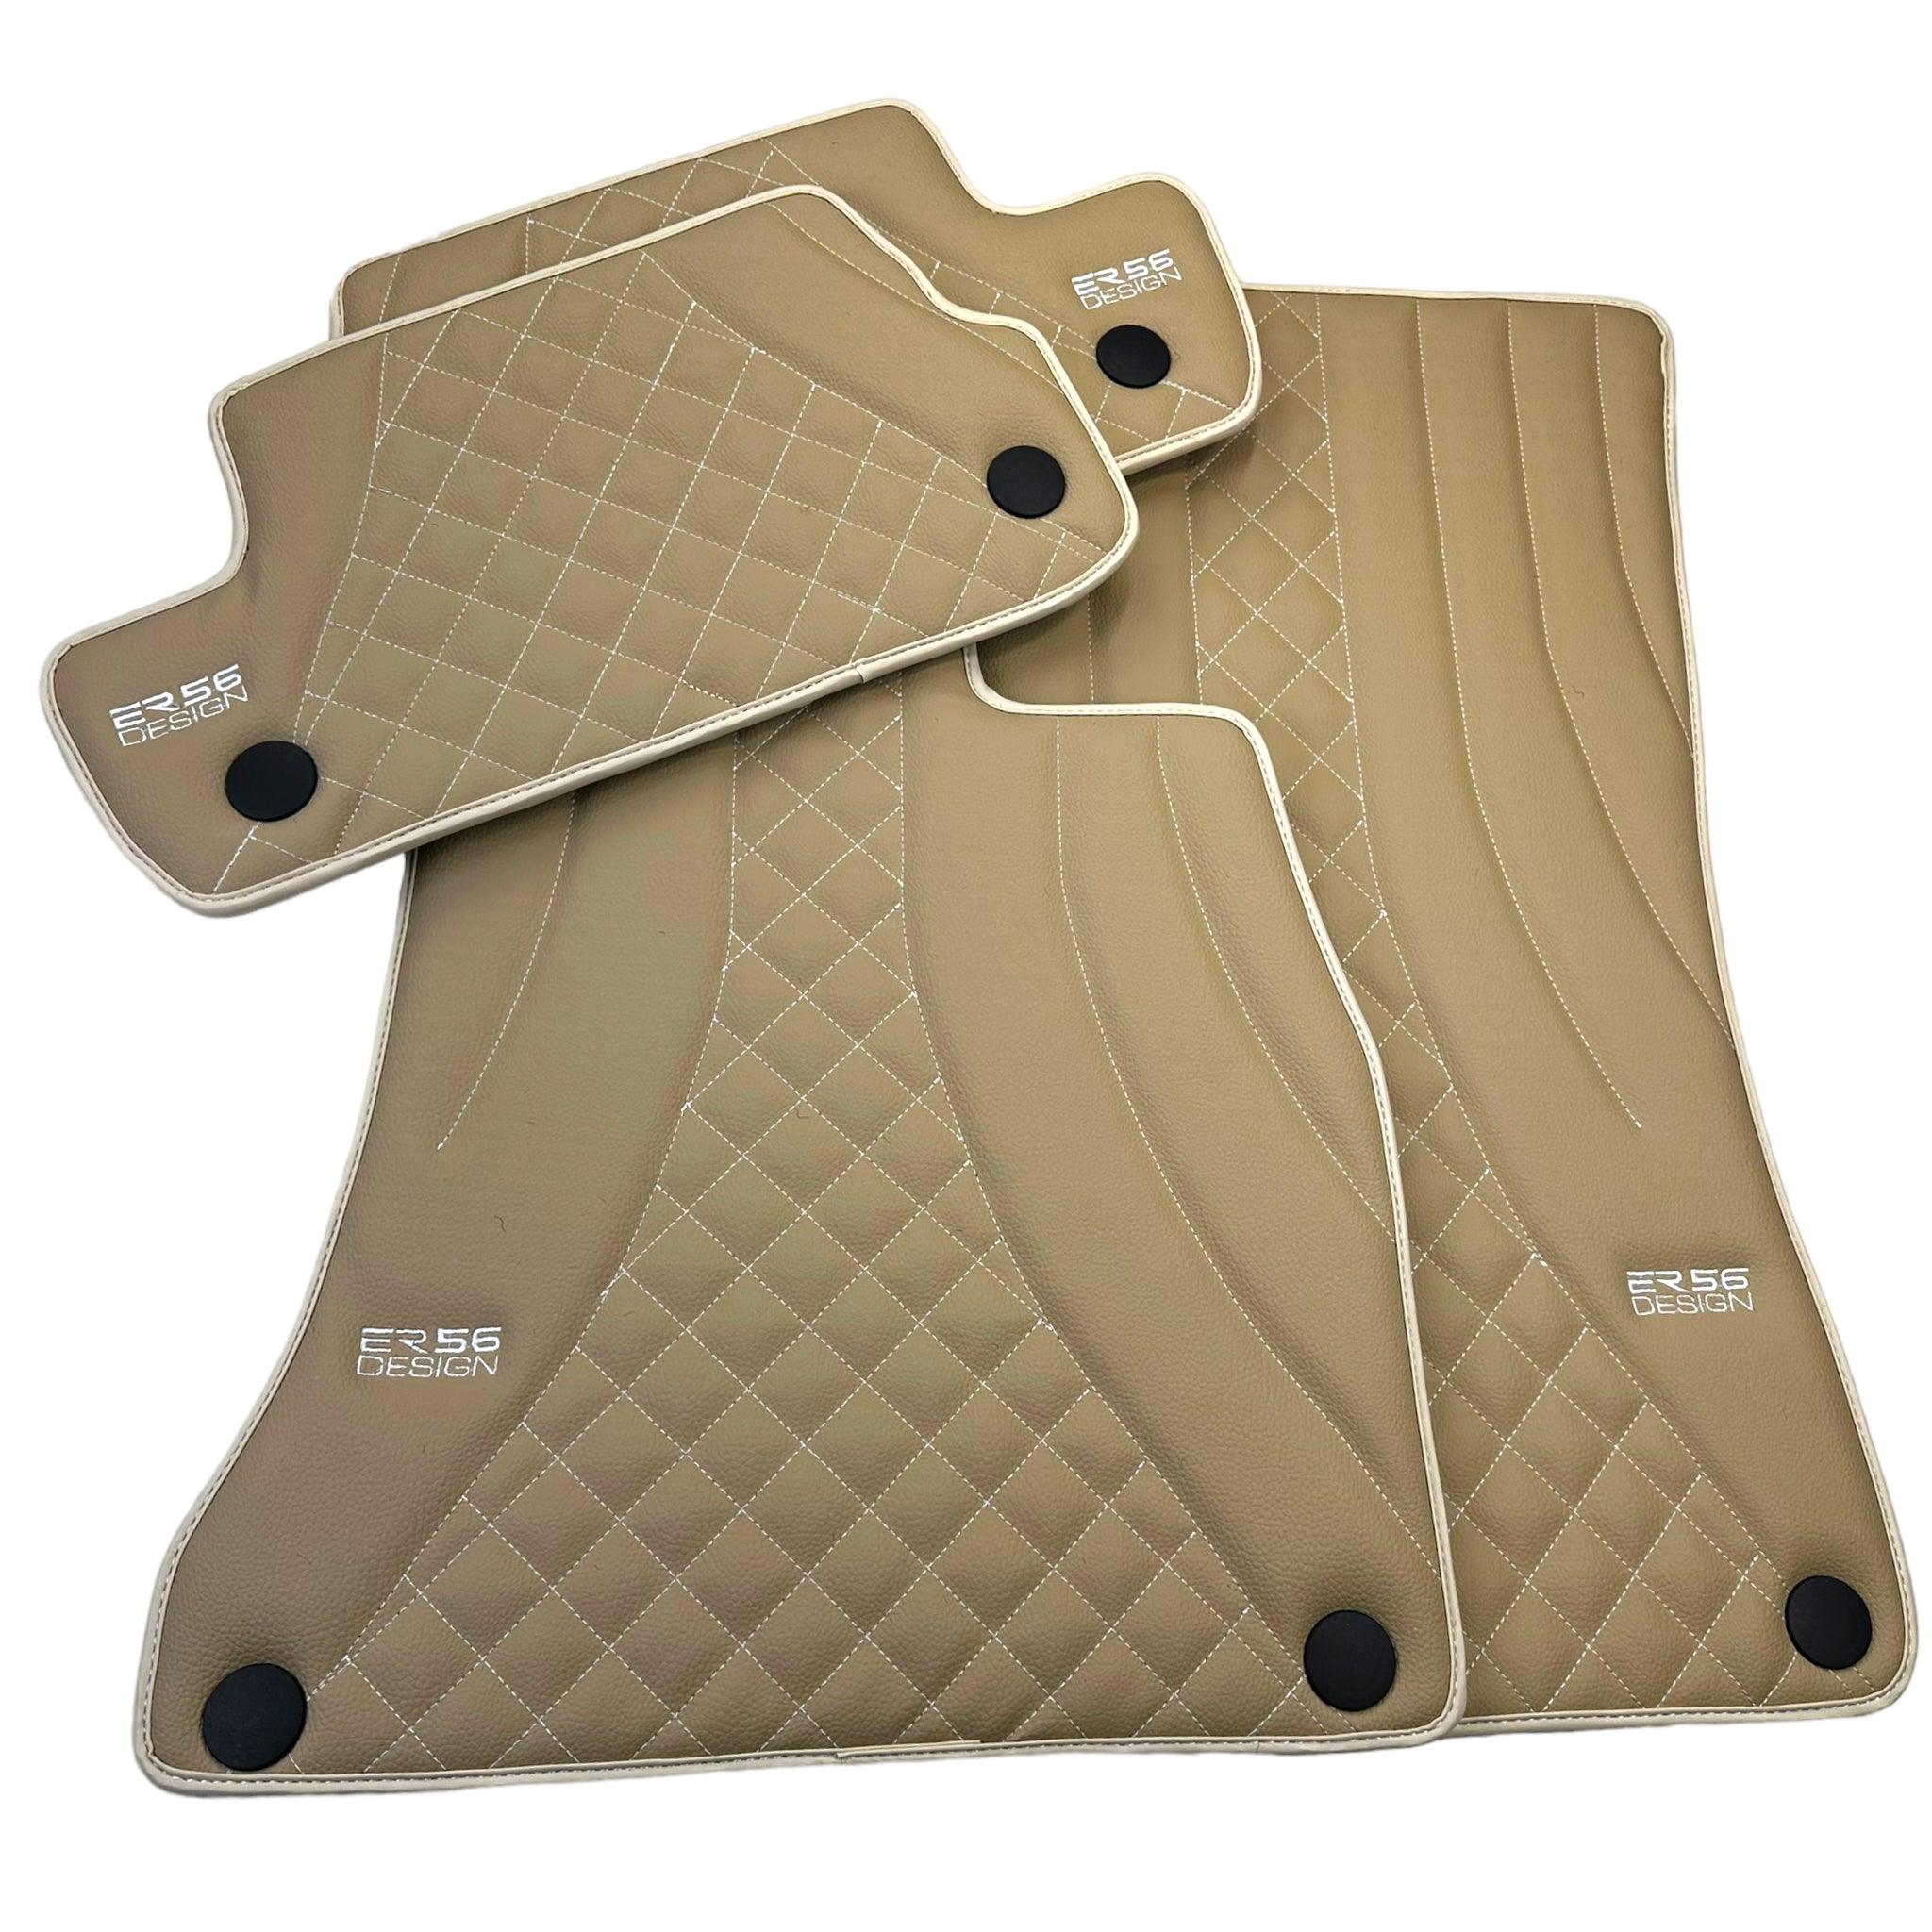 Beige Leather Floor Mats For Mercedes Benz E-Class C207 Coupe (2009-2013)